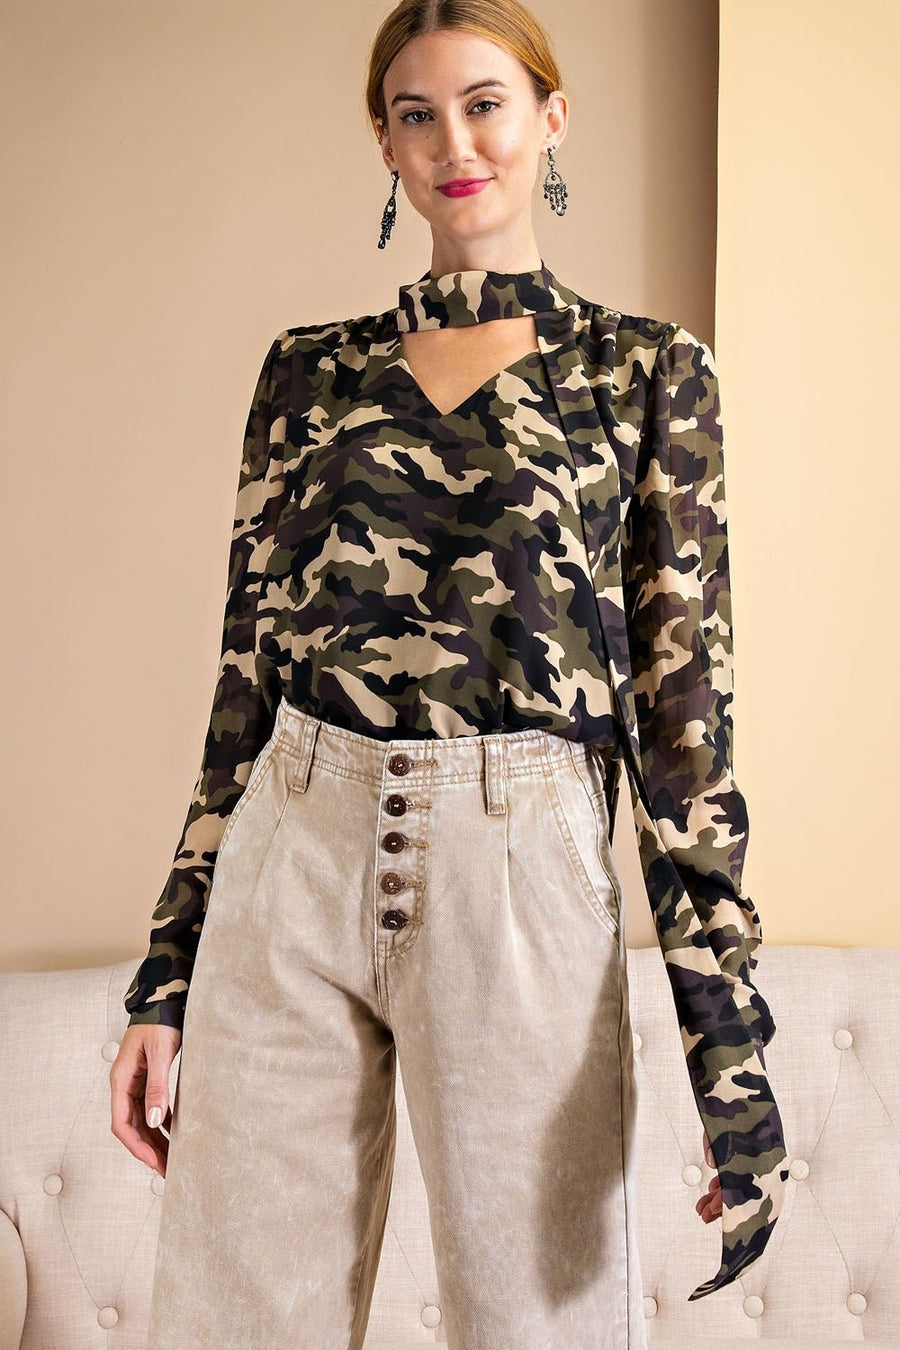 Enjoy The Day Camouflage Print Blouse